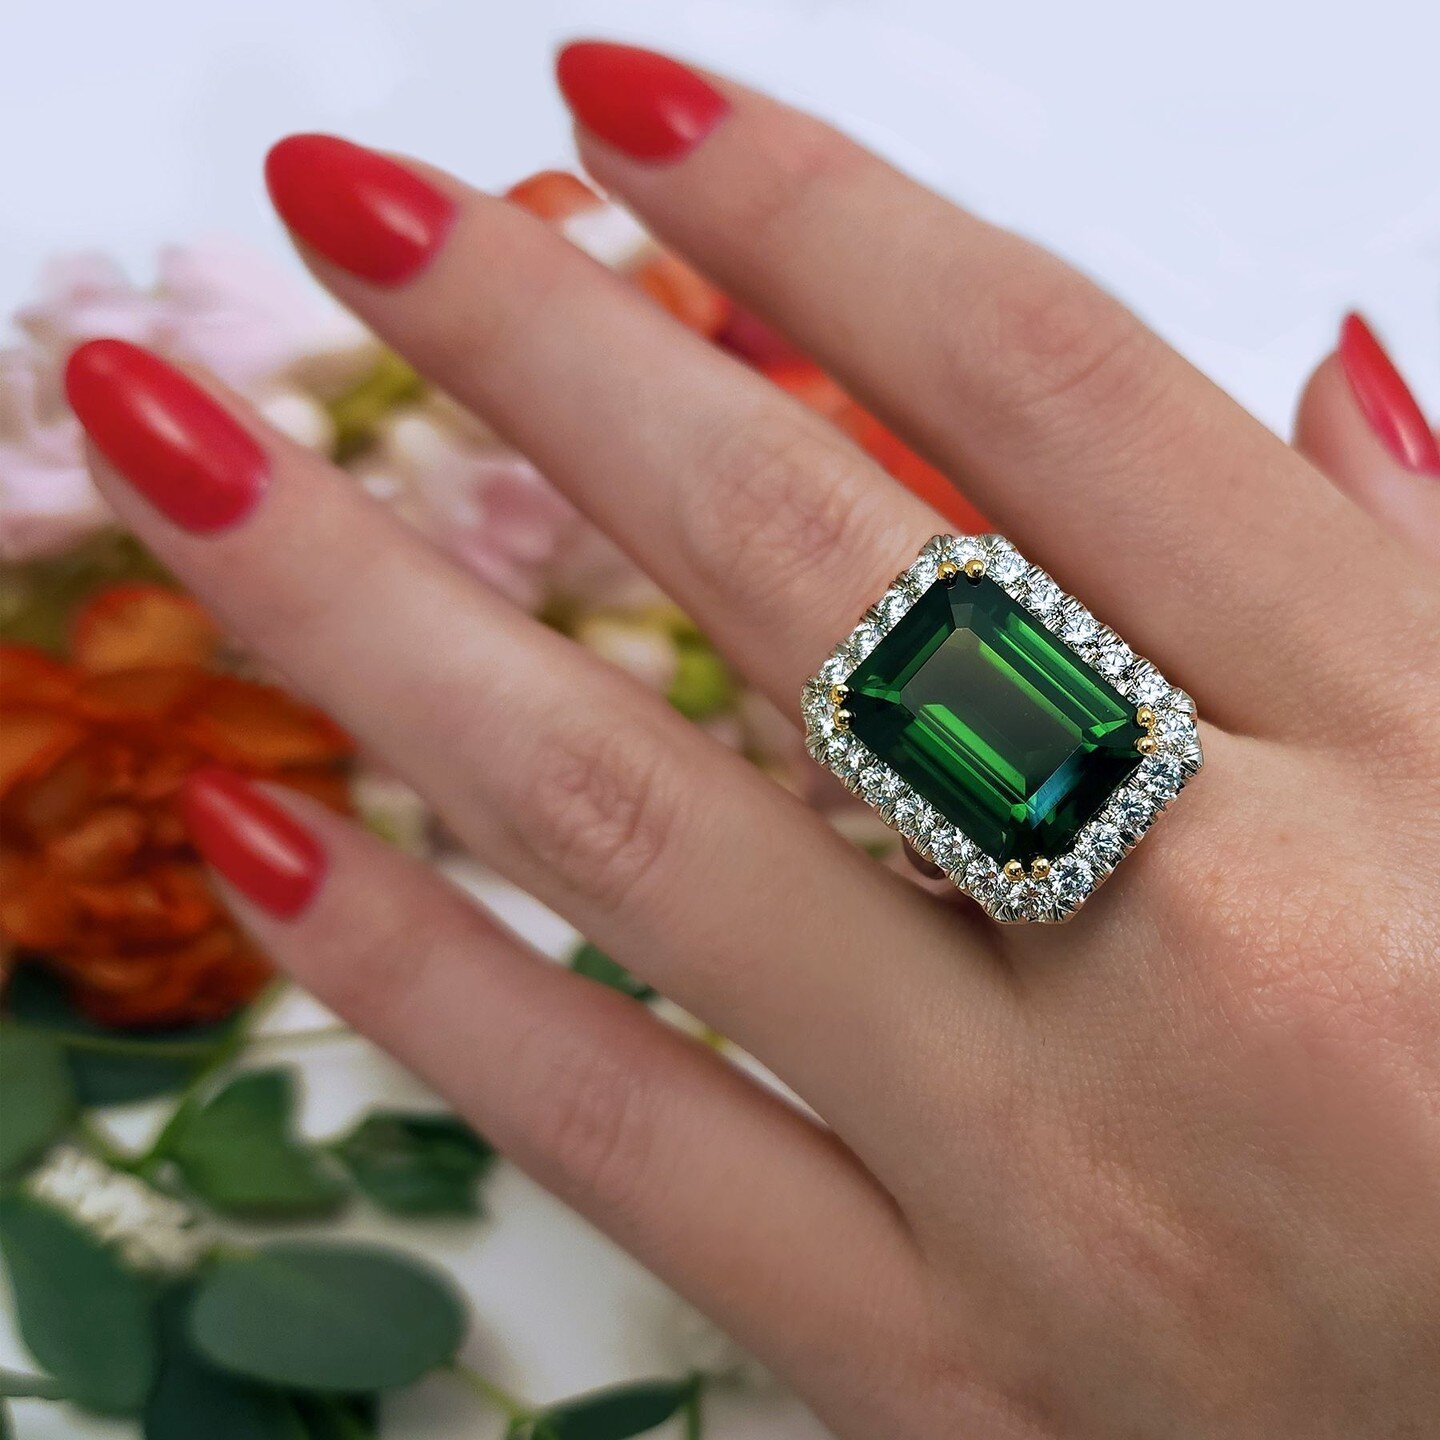 Here is a show stopper from Coast! Chrome tourmaline exhibits a bright green color that resembles, and even rivals, that of the finest emeralds. ⁠
⁠
⁠
➡️ aajewelbox.com⁠
⁠
#newportbeach #tustin #orangecounty #huntingtonbeach #costamesa #californiasty